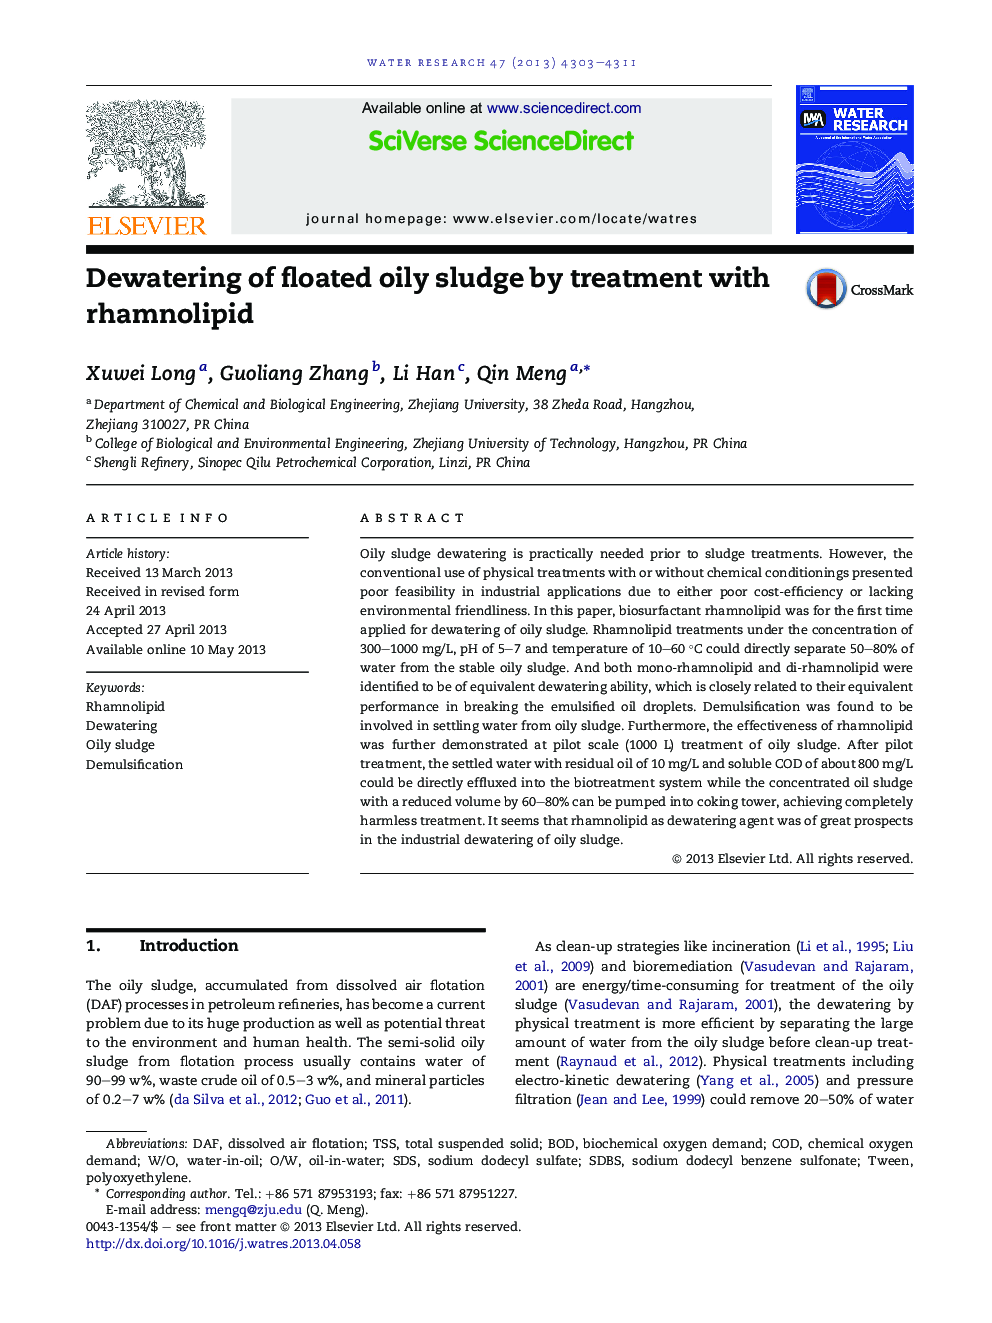 Dewatering of floated oily sludge by treatment with rhamnolipid